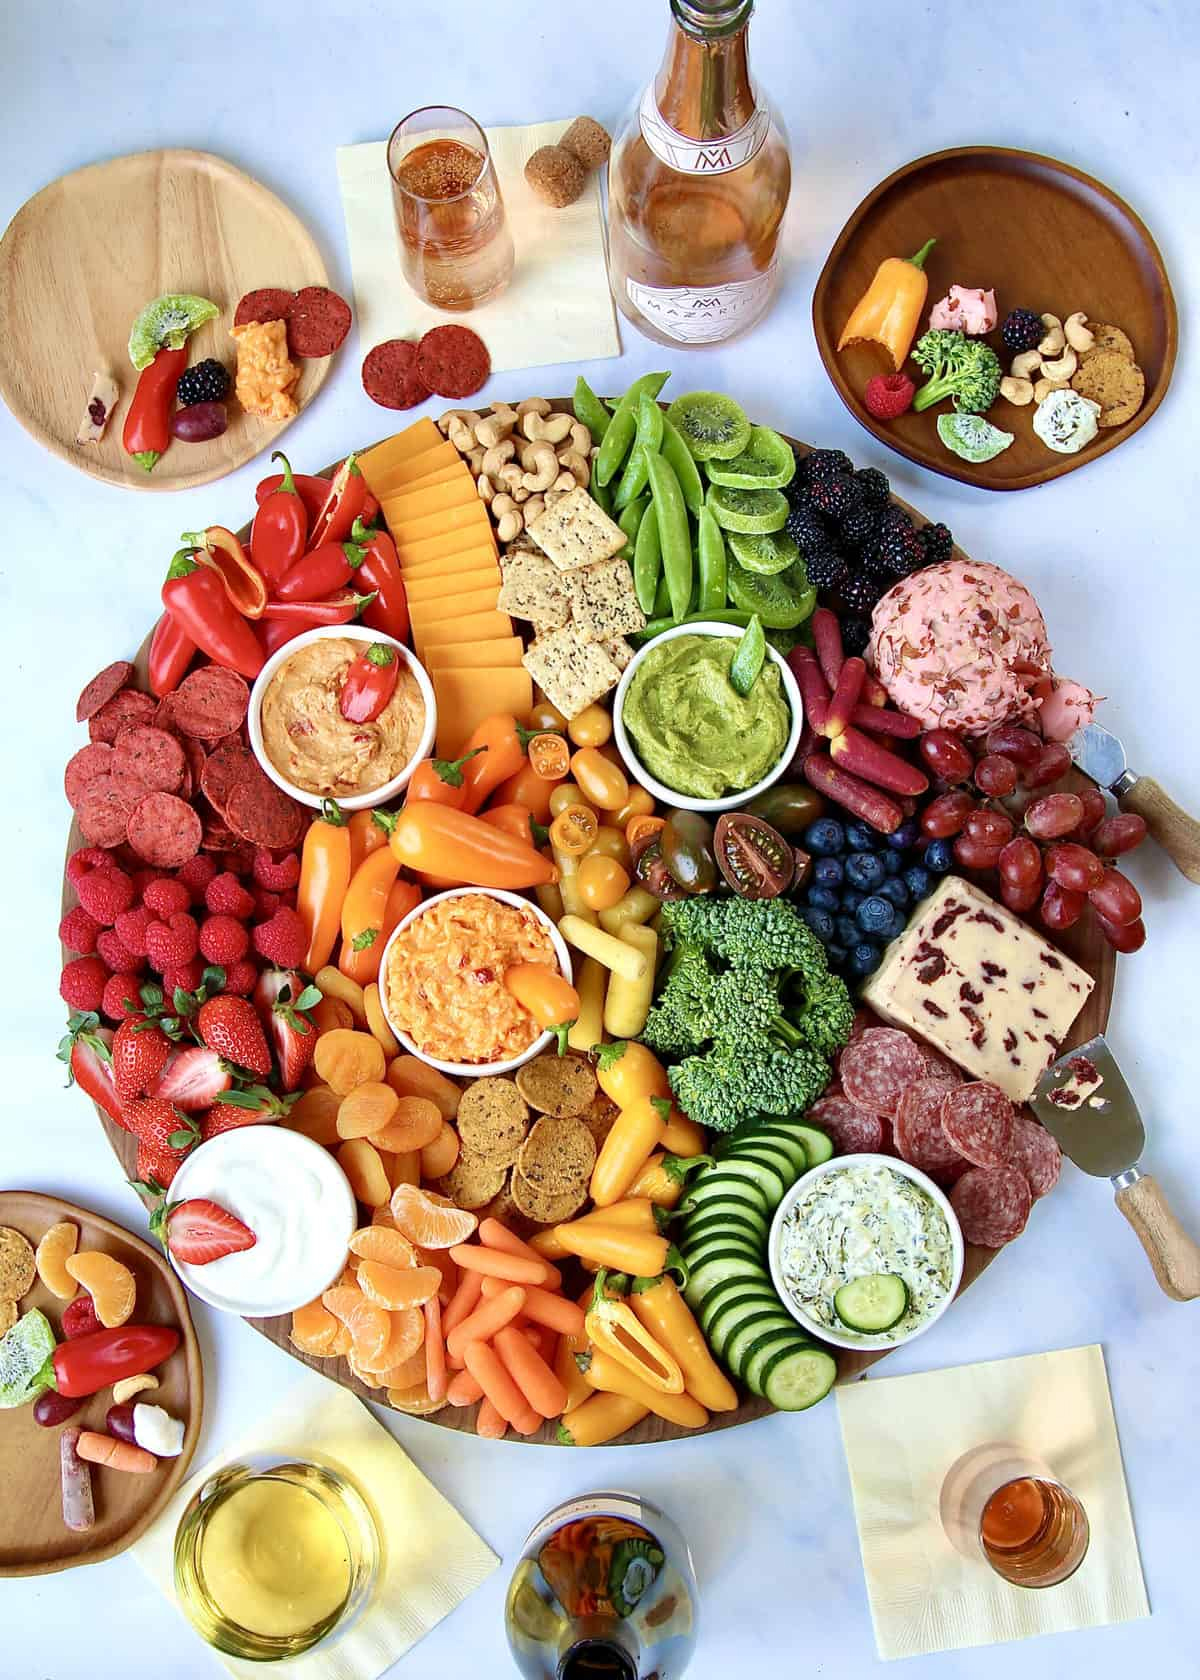 Bakermamas grown up rainbow board with wine, peppers, colorful cheeses, nuts, and more.